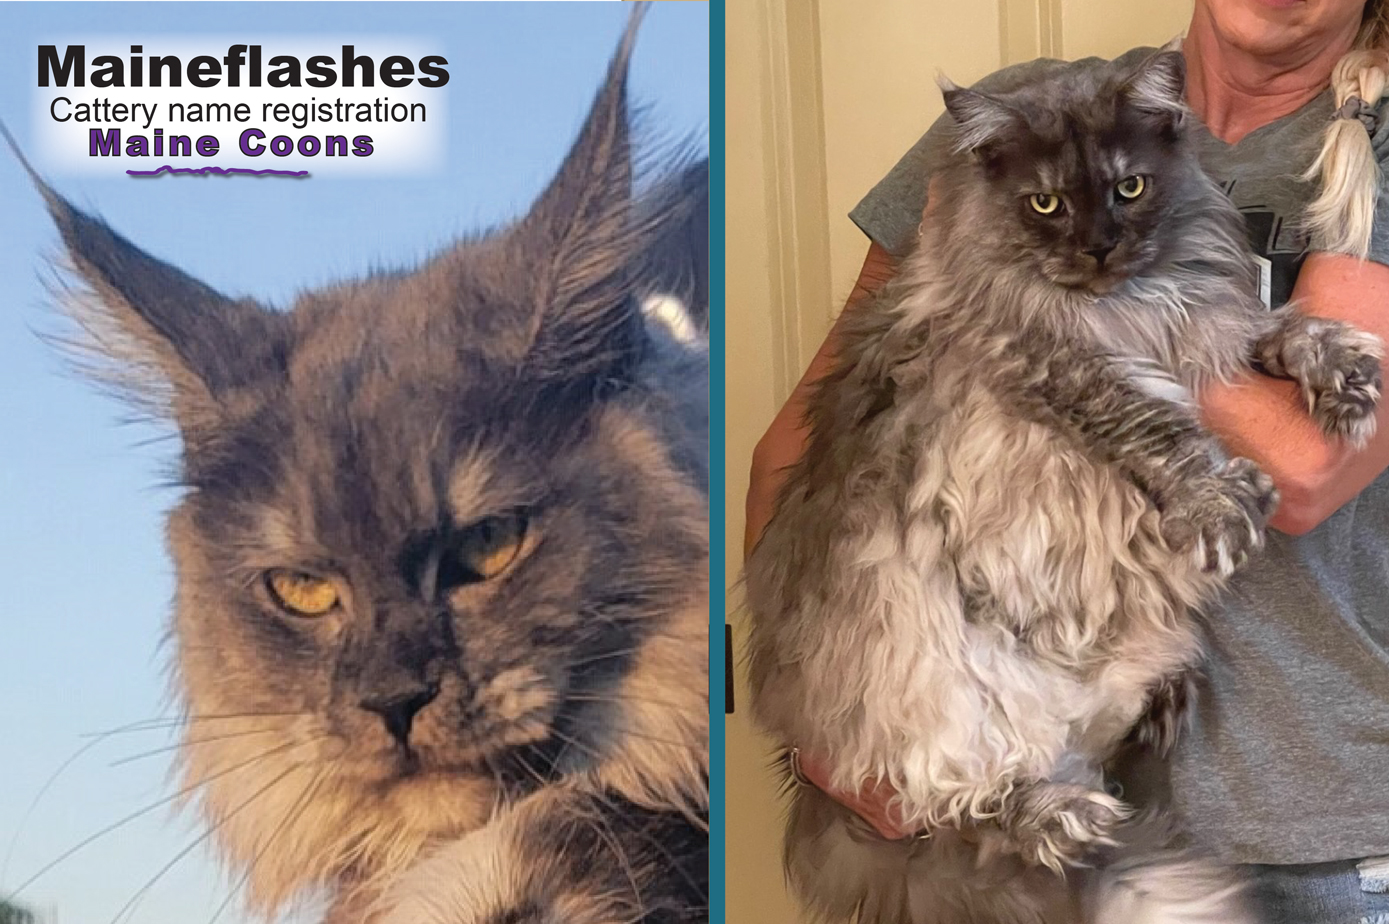 Maine Coon Cat Breeder / Maineflashes cattery name